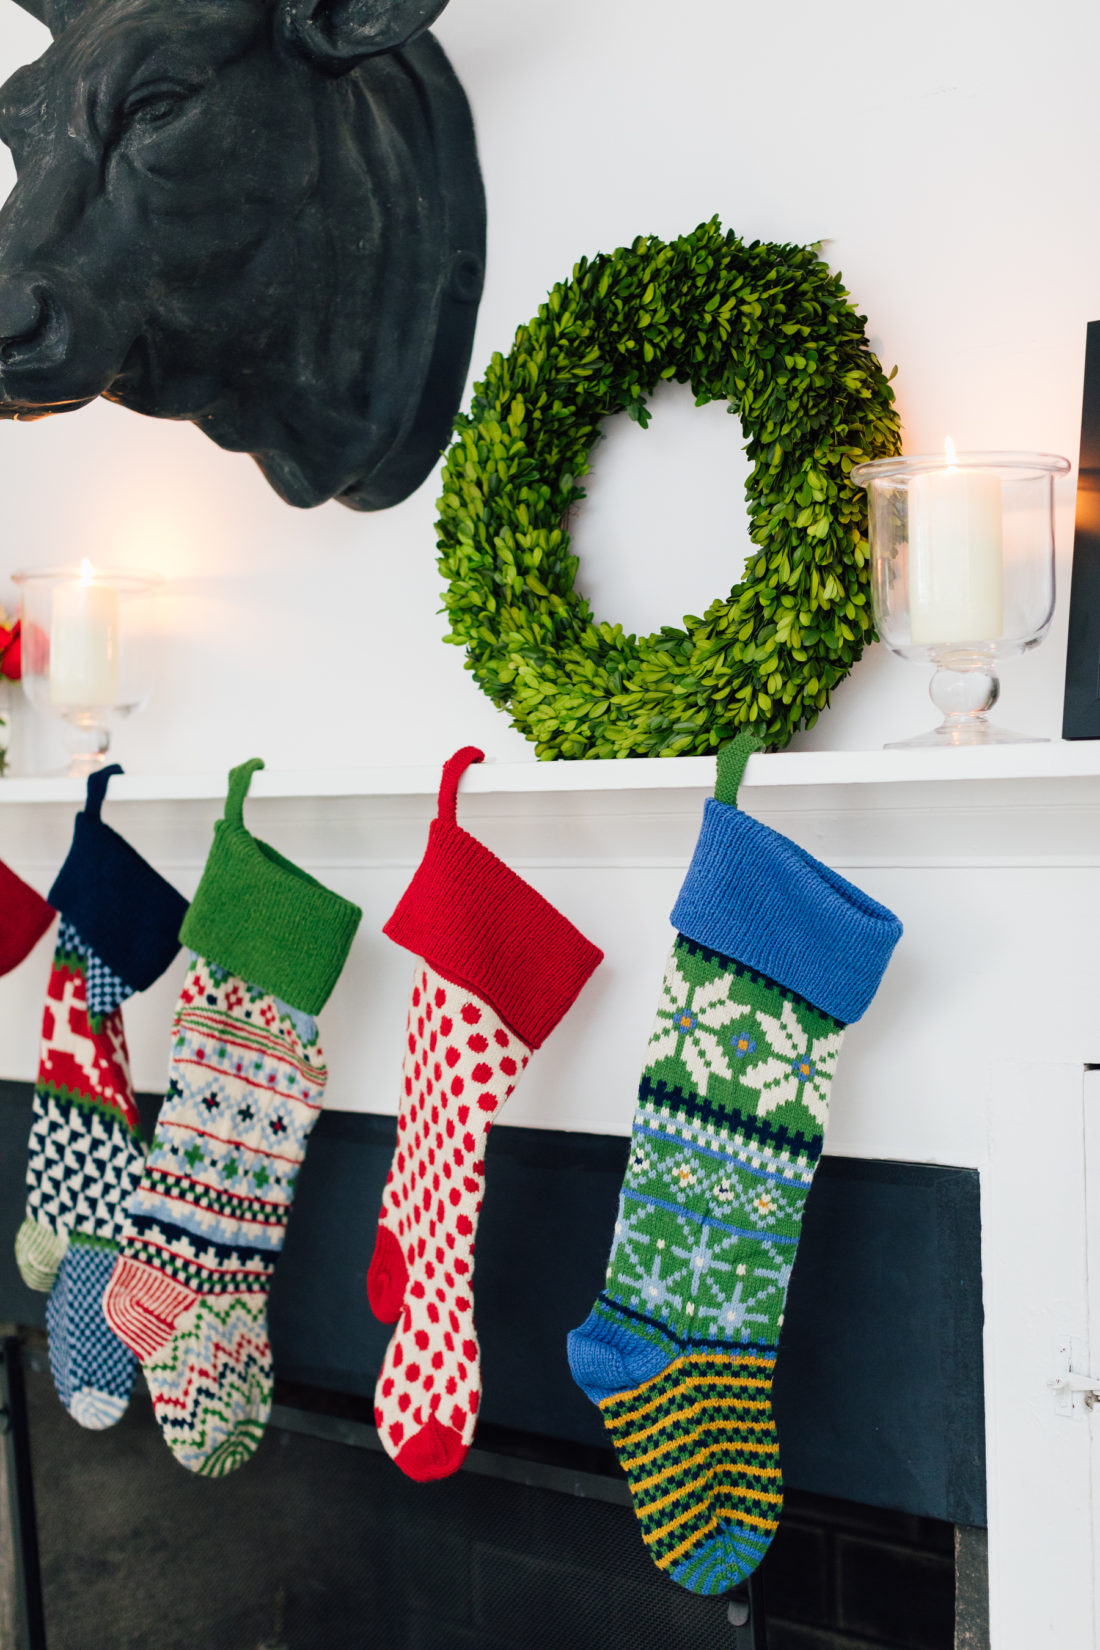 Eva Amurri Martino shares her favorite gifts from Garnet Hill, including these knit Christmas Stockings